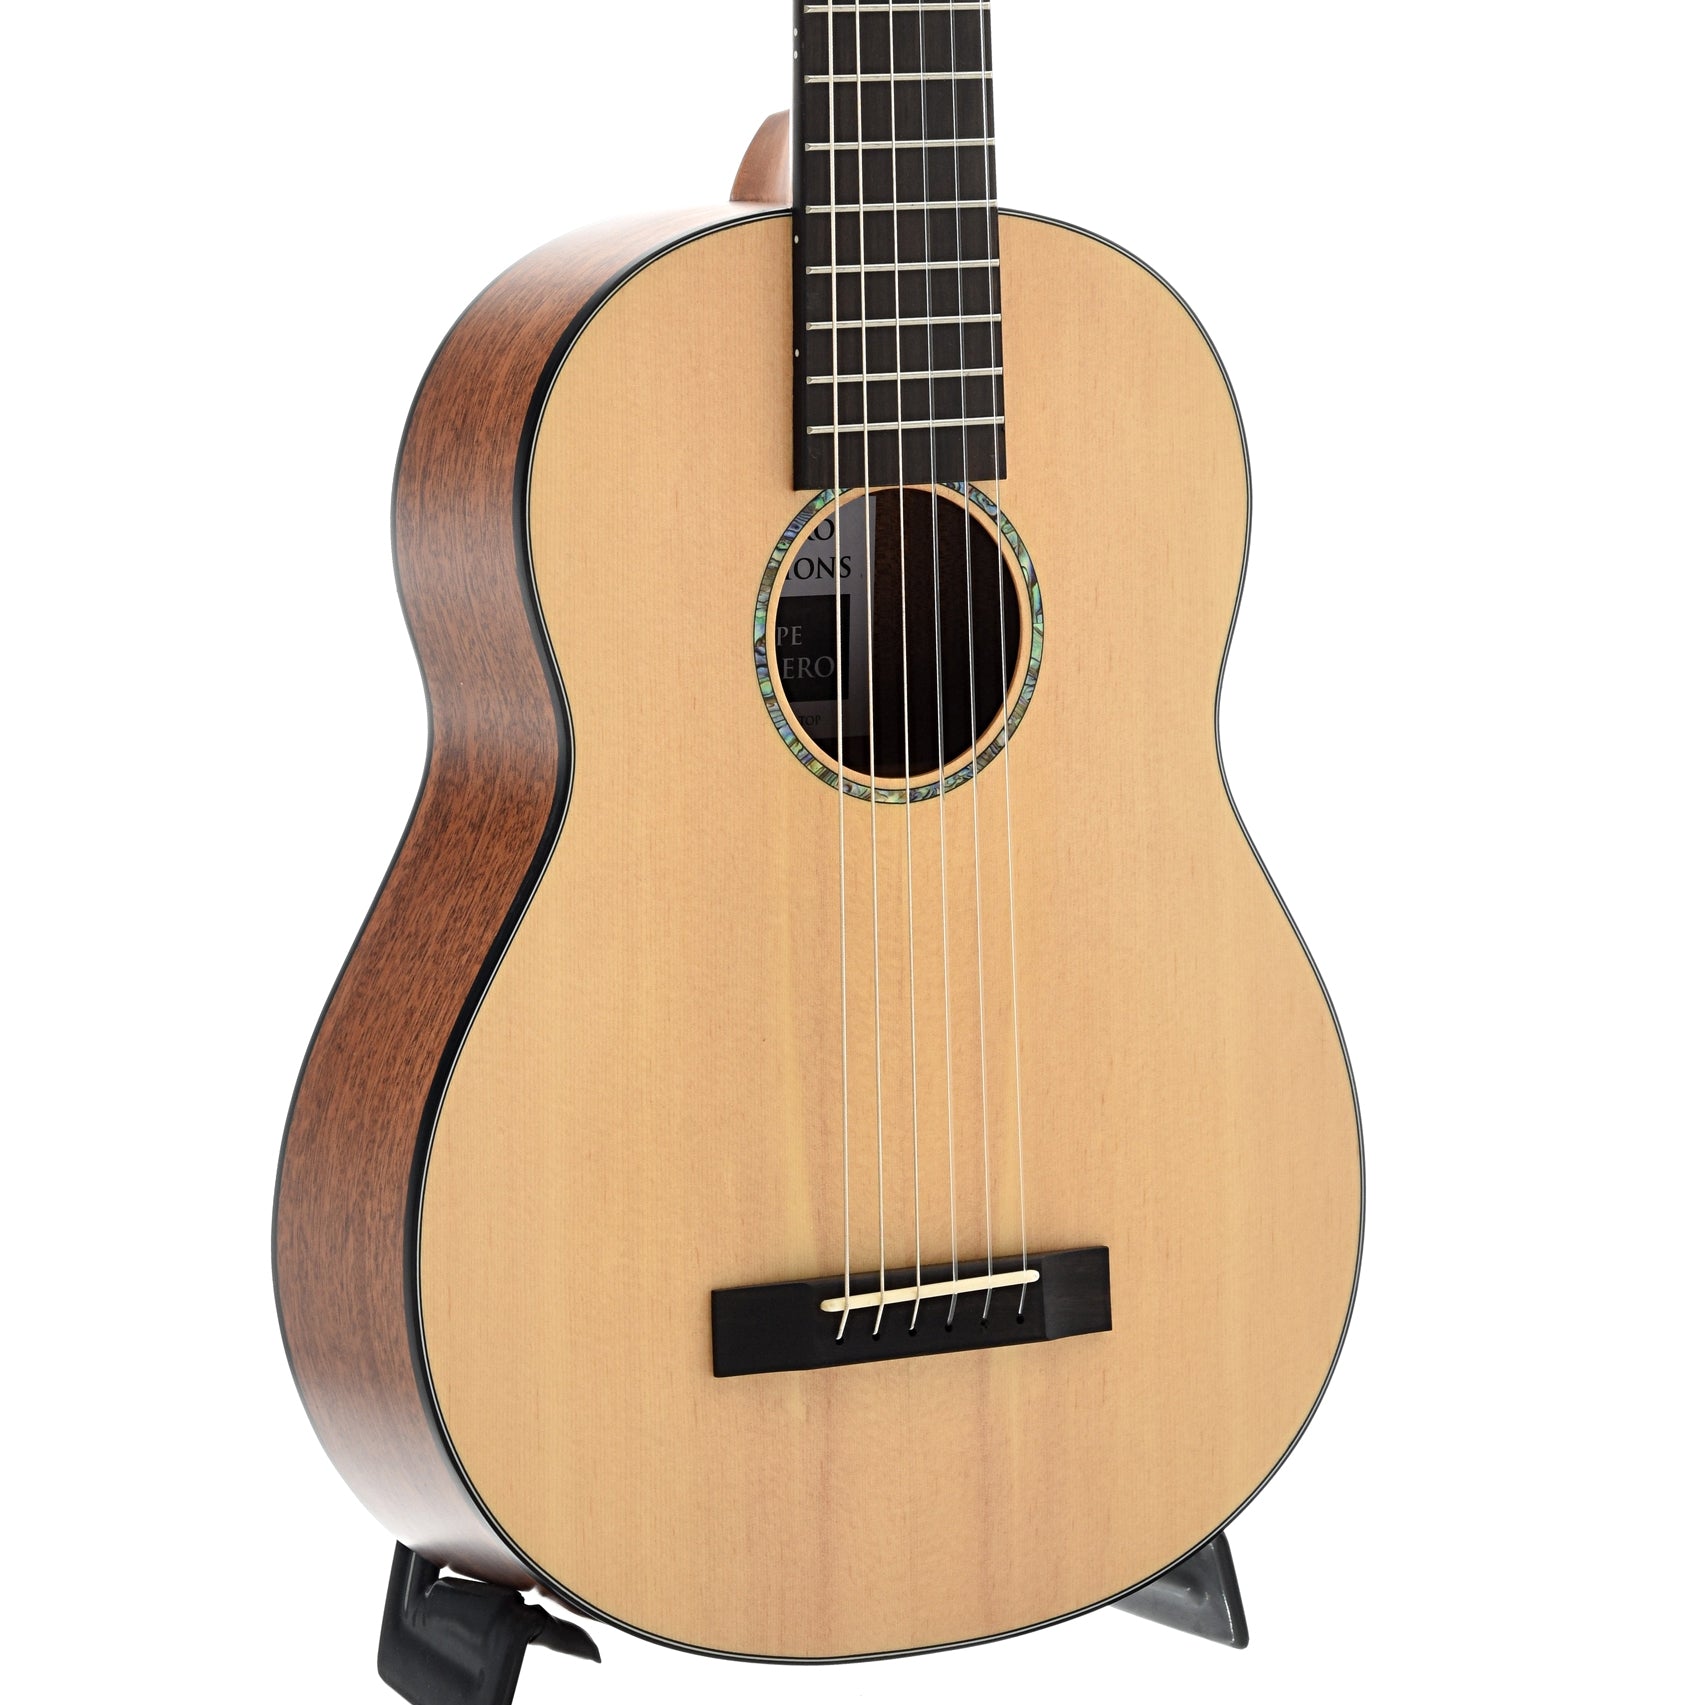 Image 2 of Romero Creations Pepe Romero, SR. Signature Model, Solid Spruce and Mahogany, with Case - SKU# RPR6SM : Product Type Classical & Flamenco Guitars : Elderly Instruments